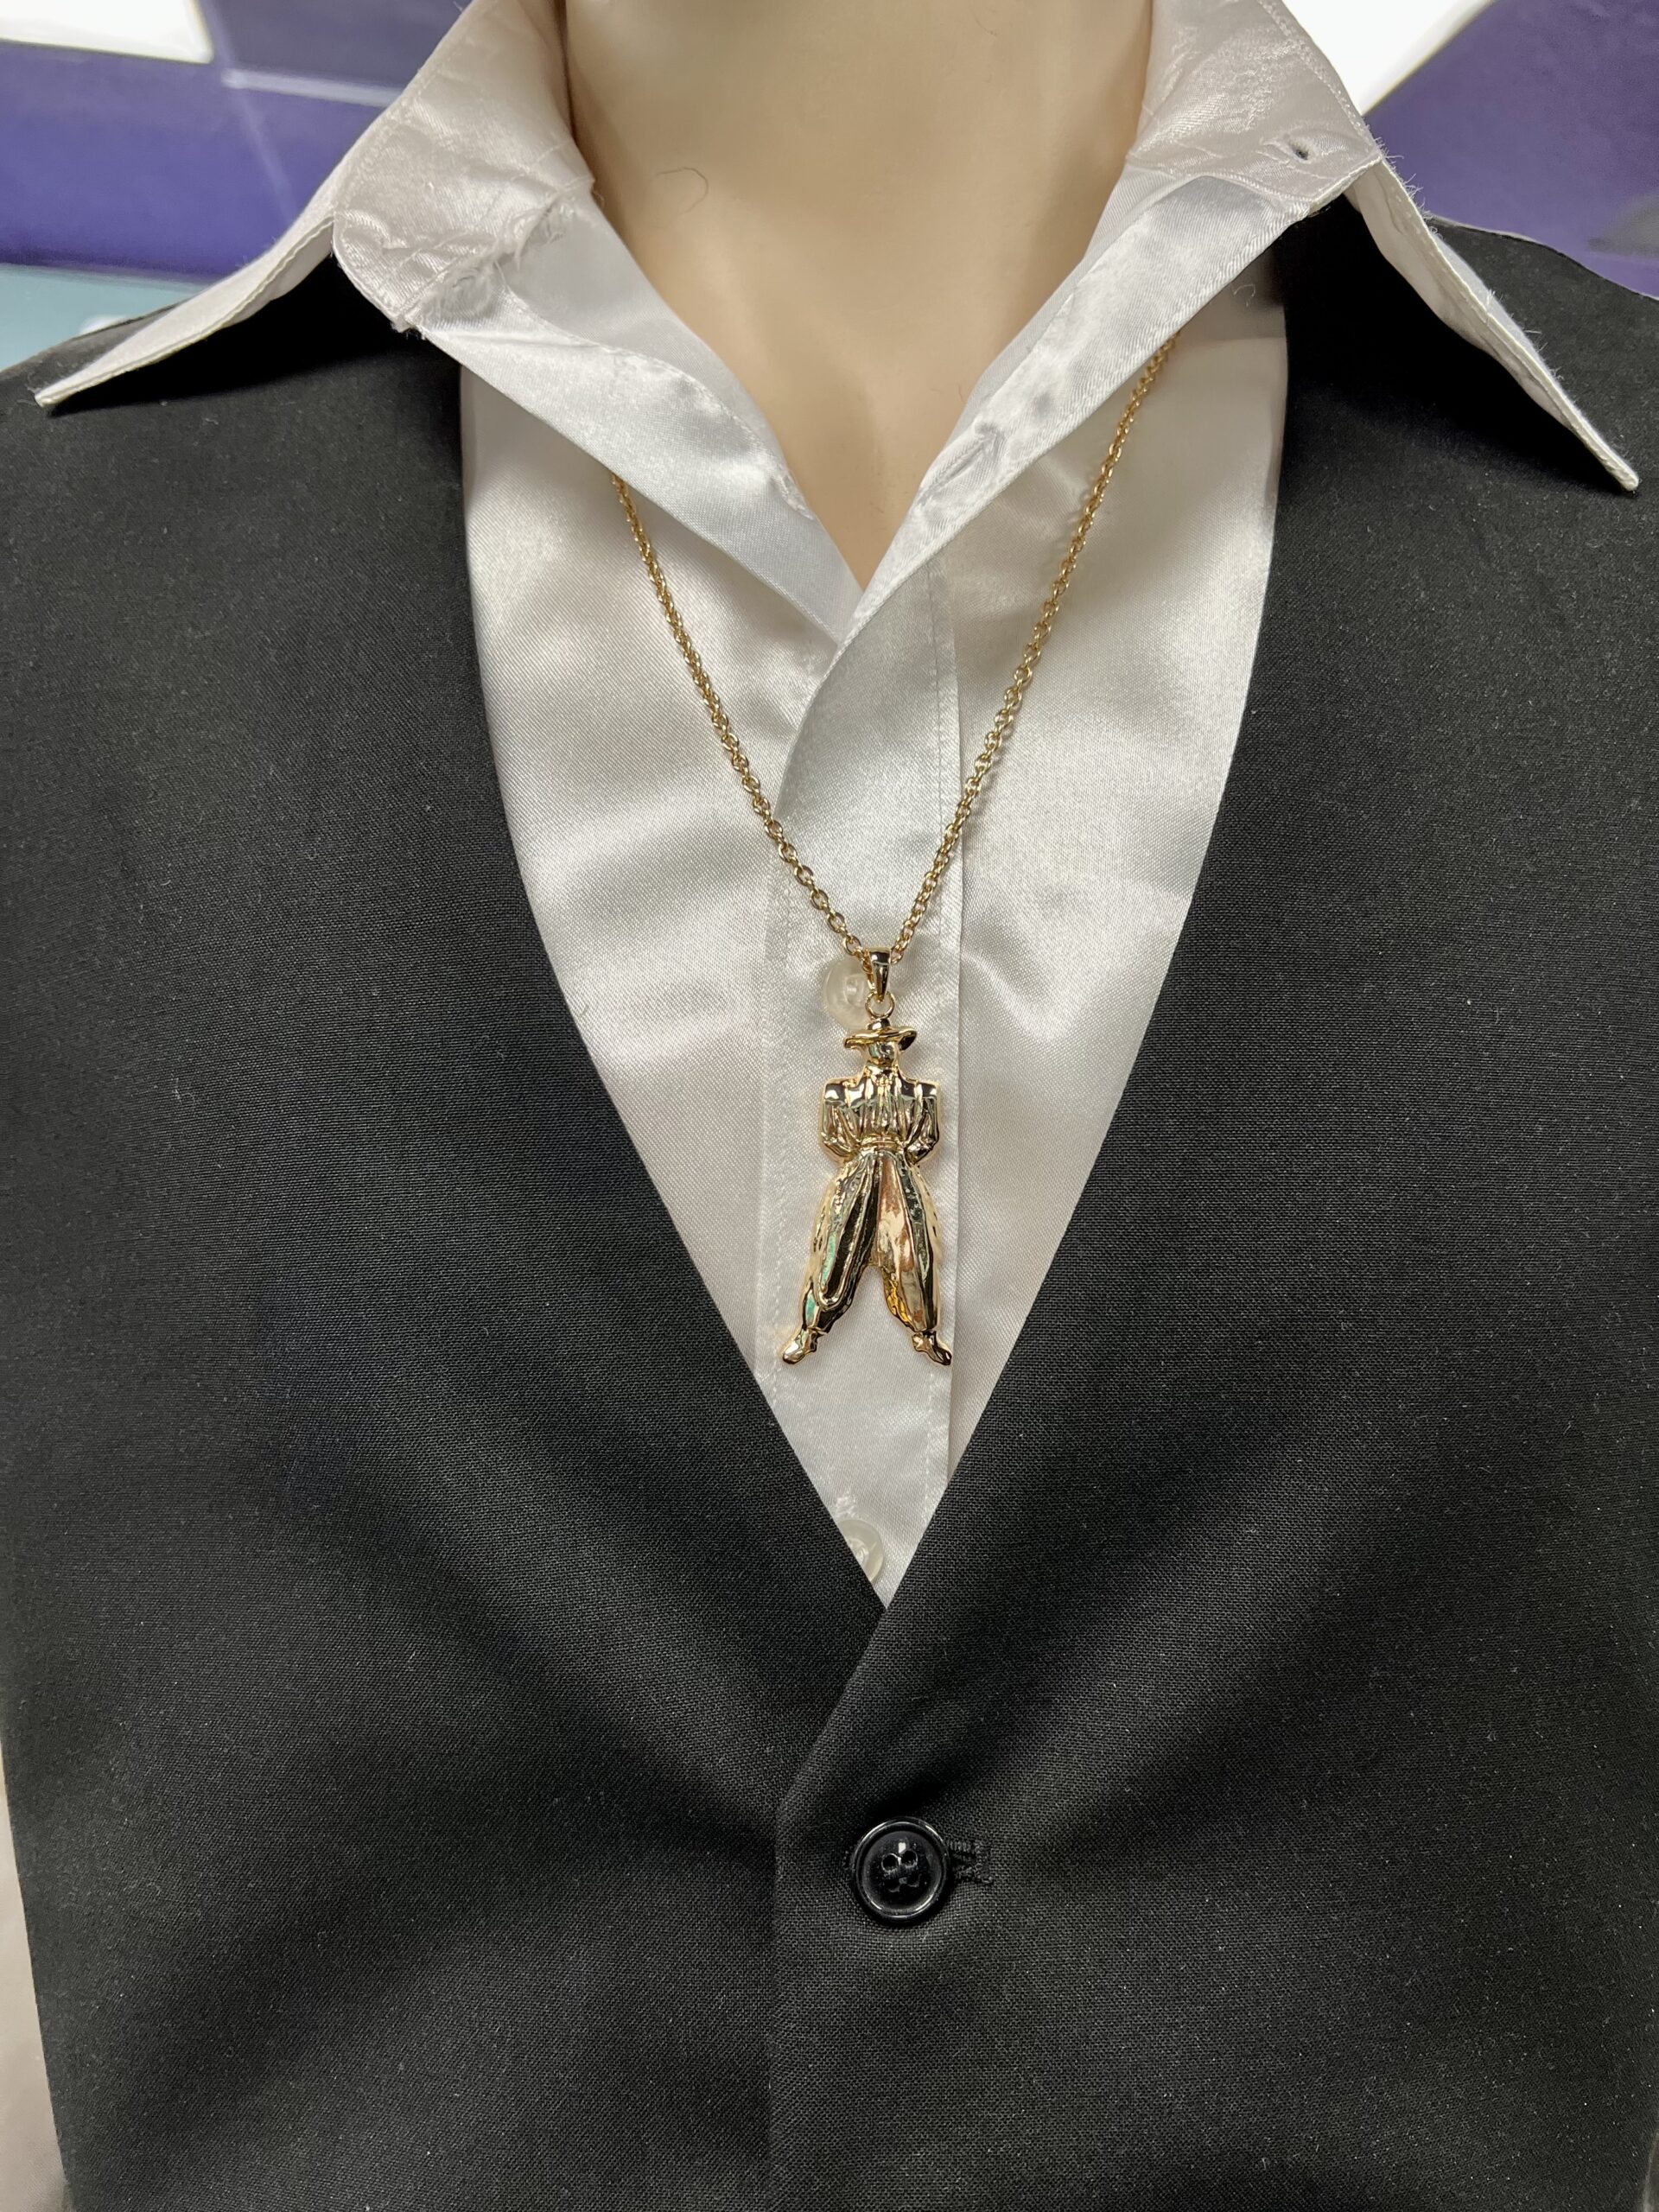 Drake splashes out $1M on a customized heart necklace that has 100 carats |  Daily Mail Online